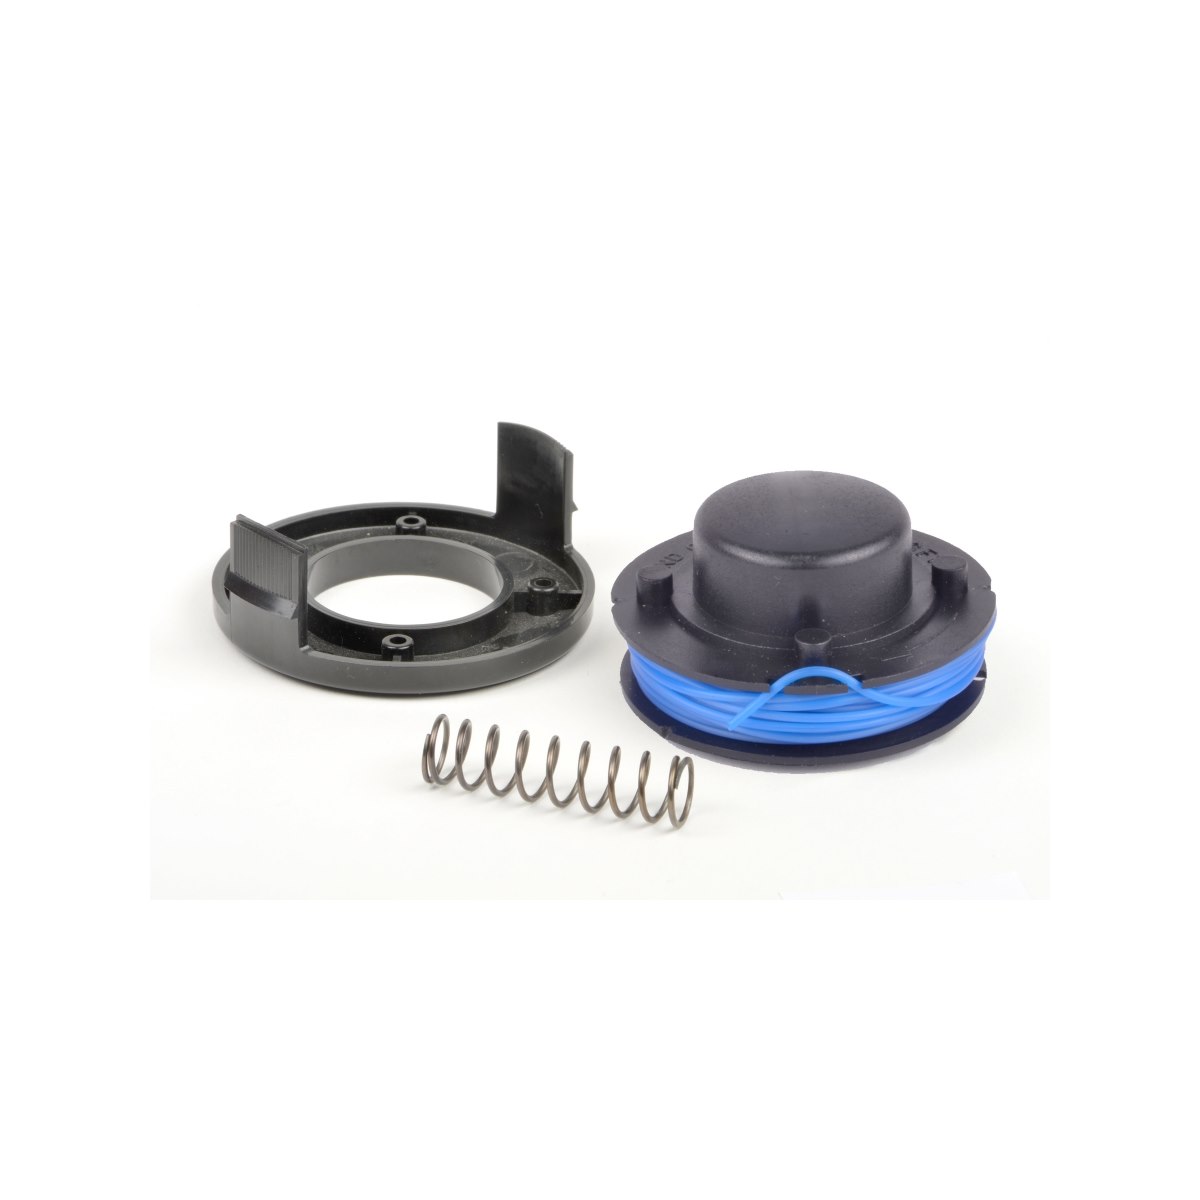 ALM CG402 Replacement Spool, Line and Cover for Draper Grass Trimmers